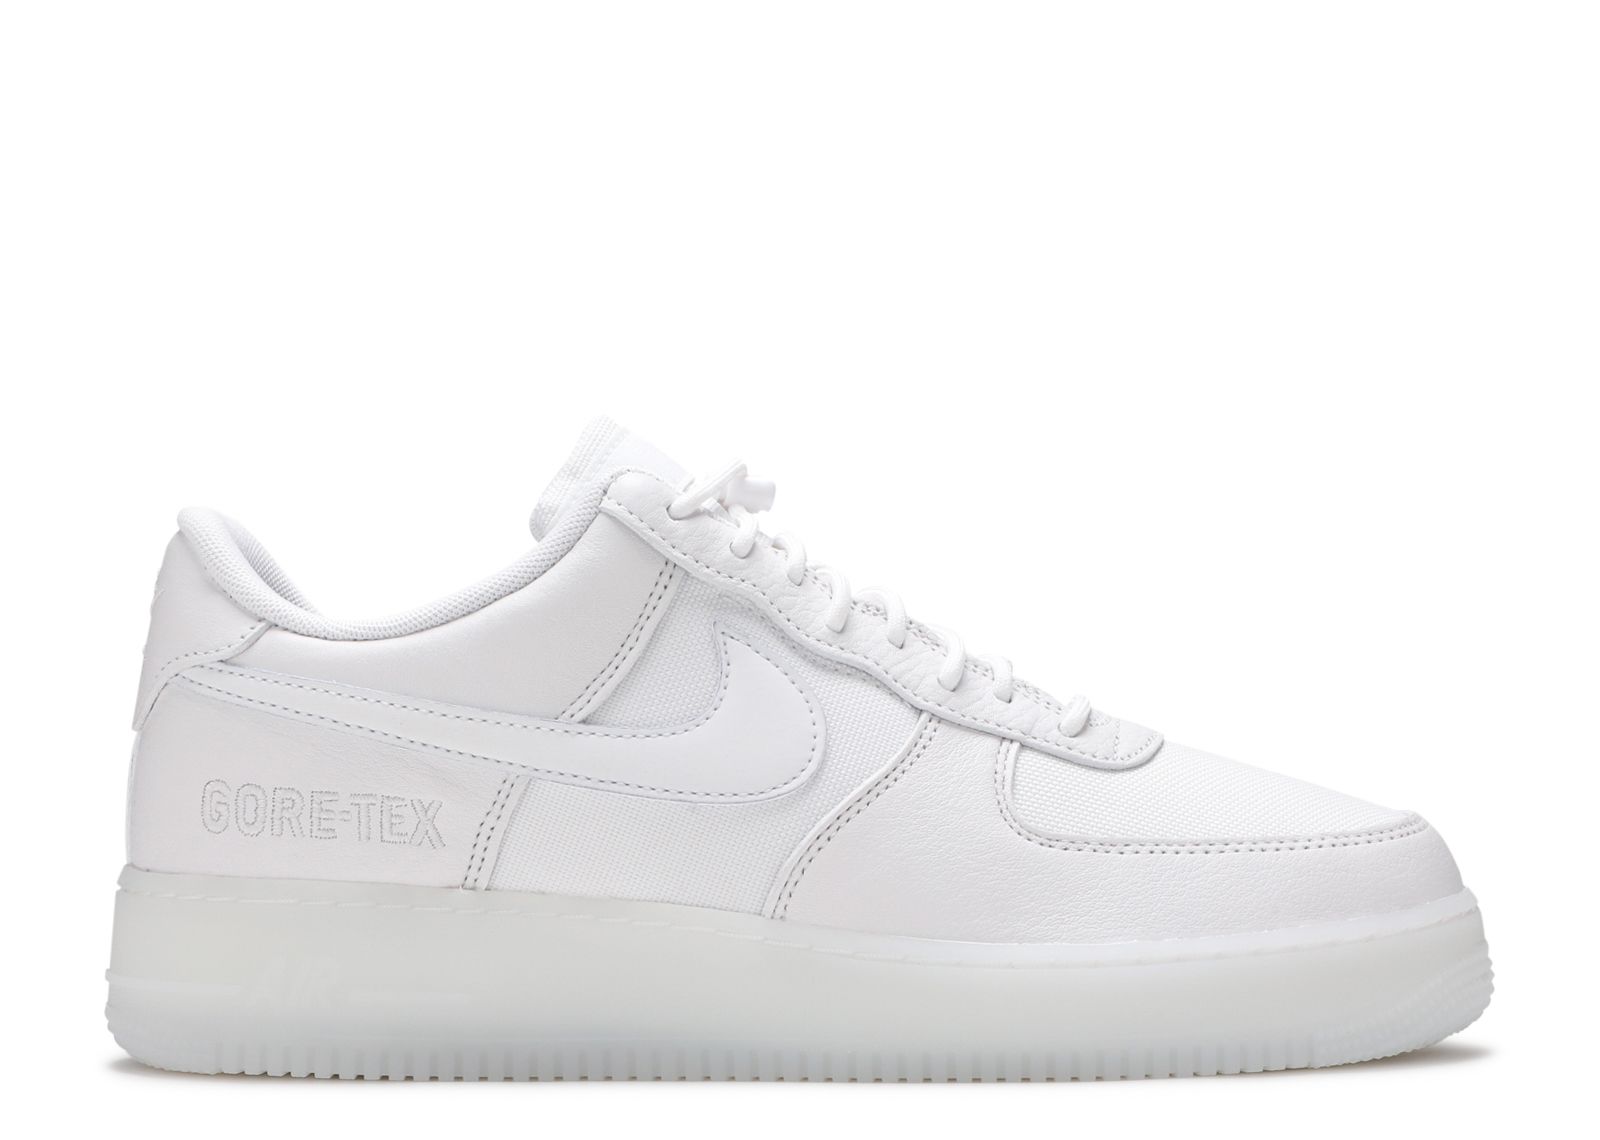 GORE-TEX SUMMER SHOWER 2021 NIKE AIR FORCE 1 LOW 2021 